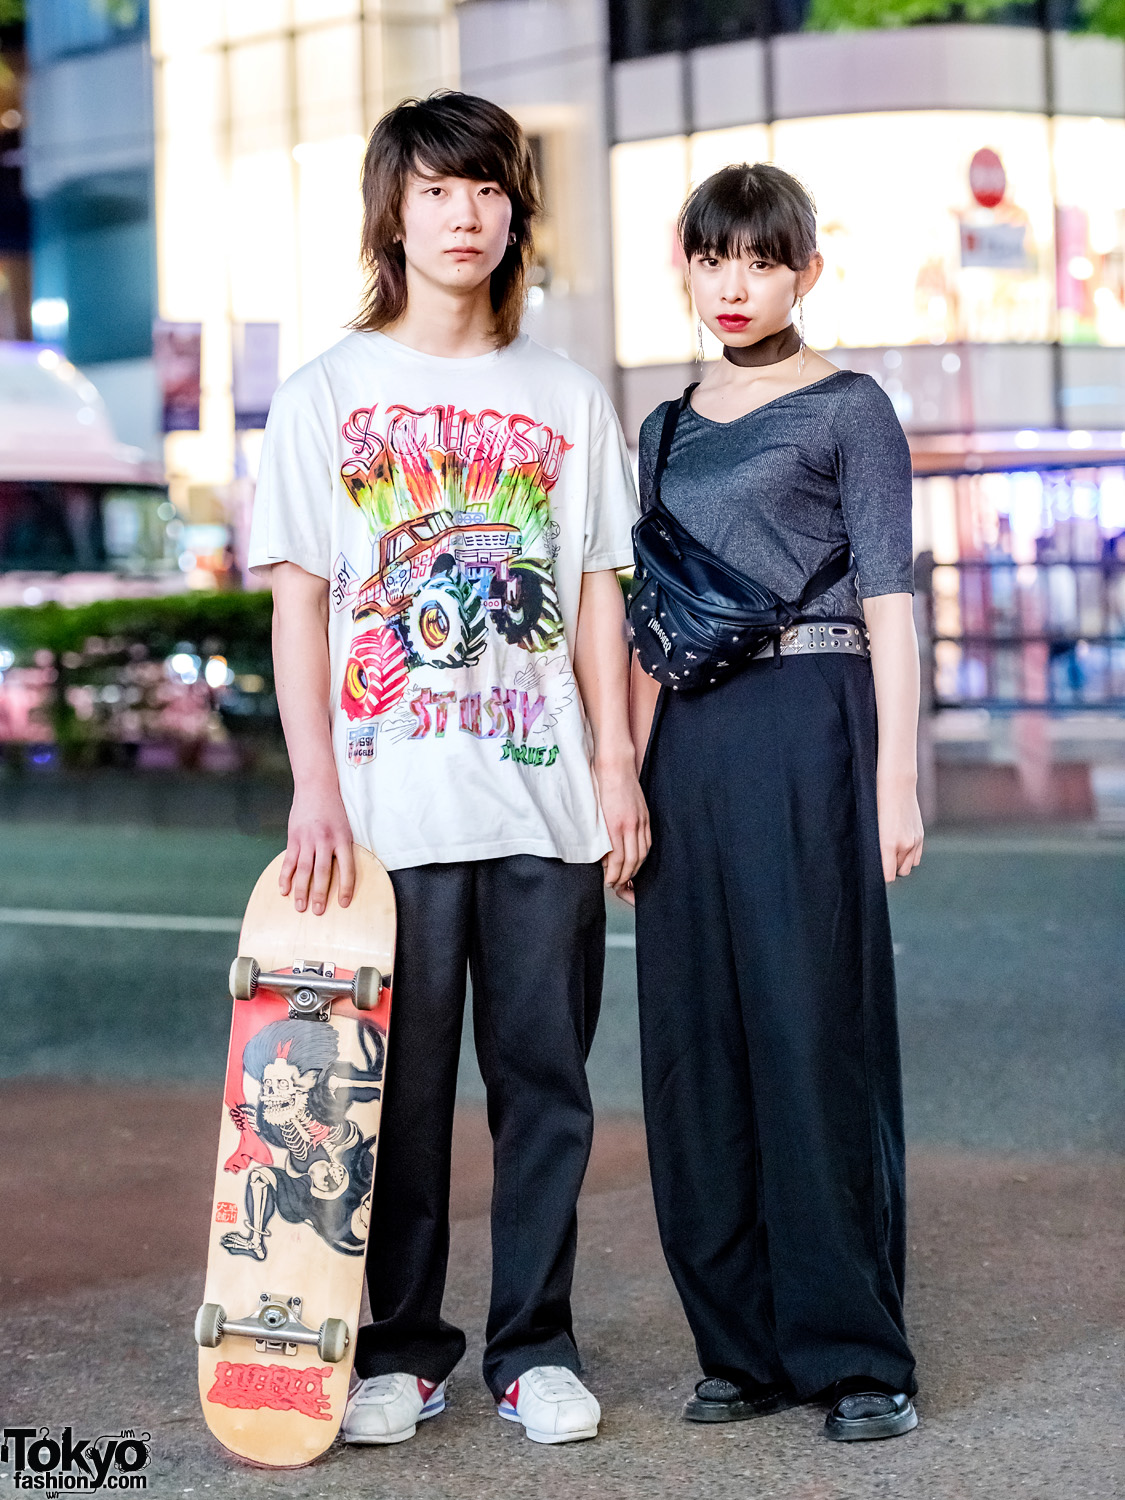 Casual Street Styles in Harajuku w/ Dickies, Stussy, Nike, Thrasher, Dr. Martens & Toga